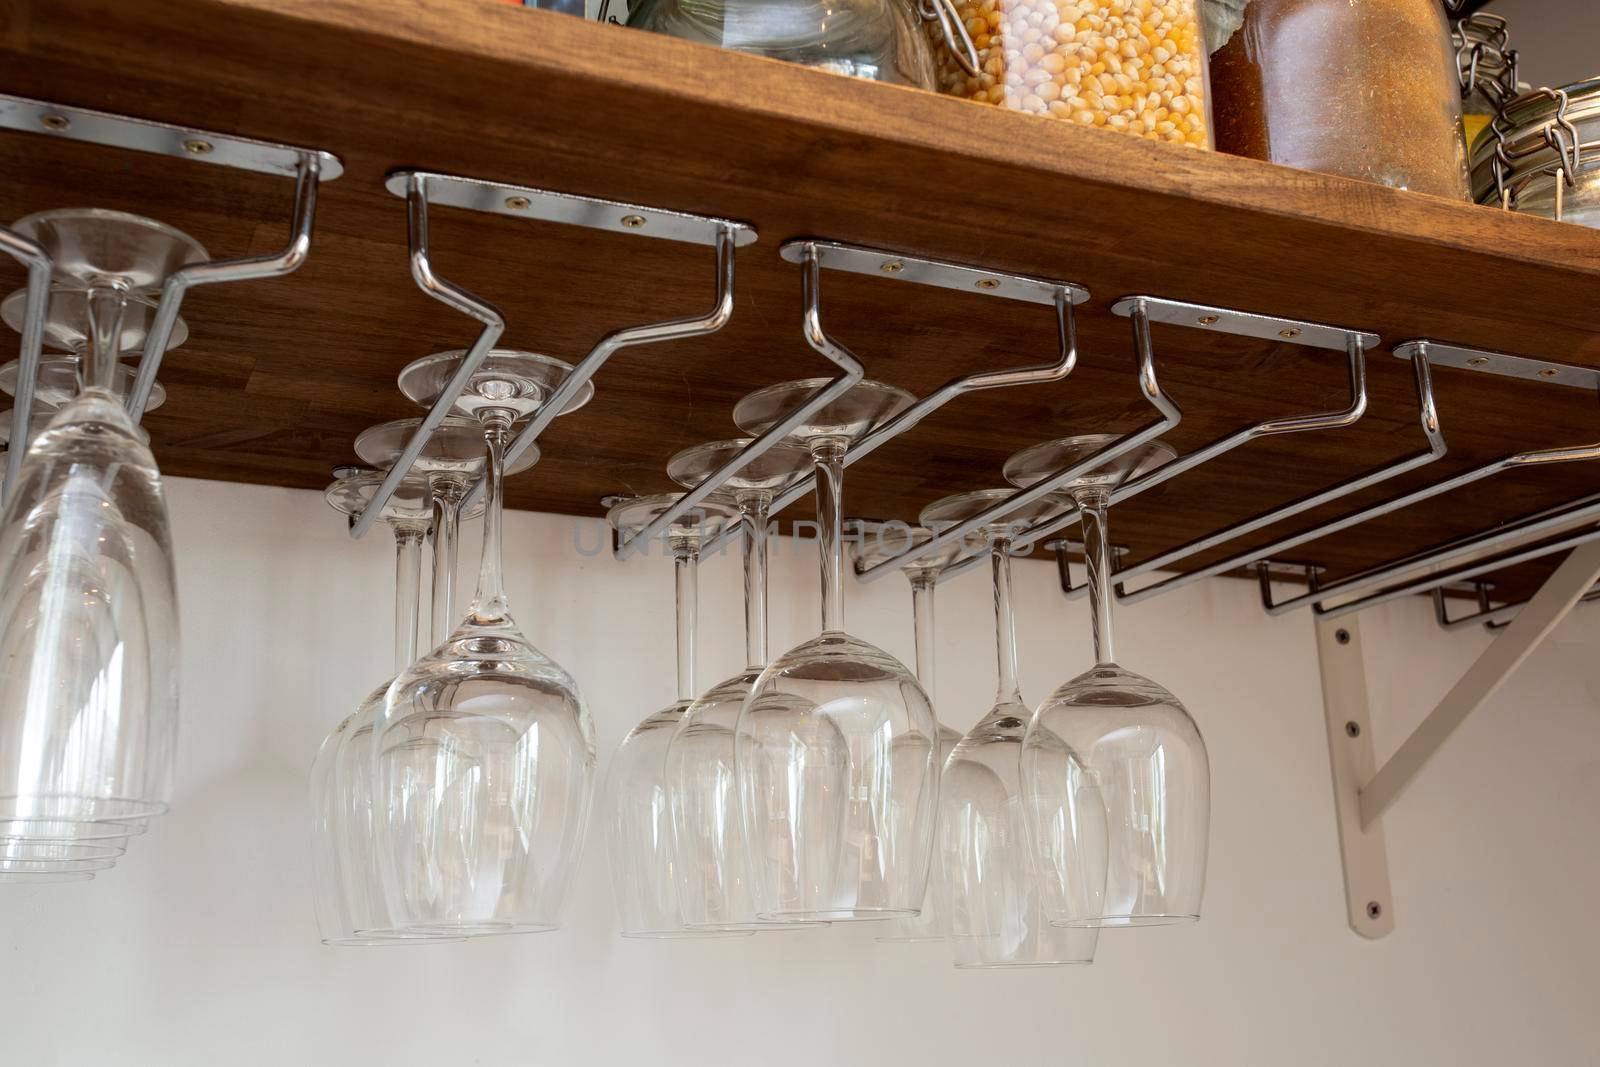 Wine glasses hanging in holder. organized inside cupboard. home interior storage by Annebel146